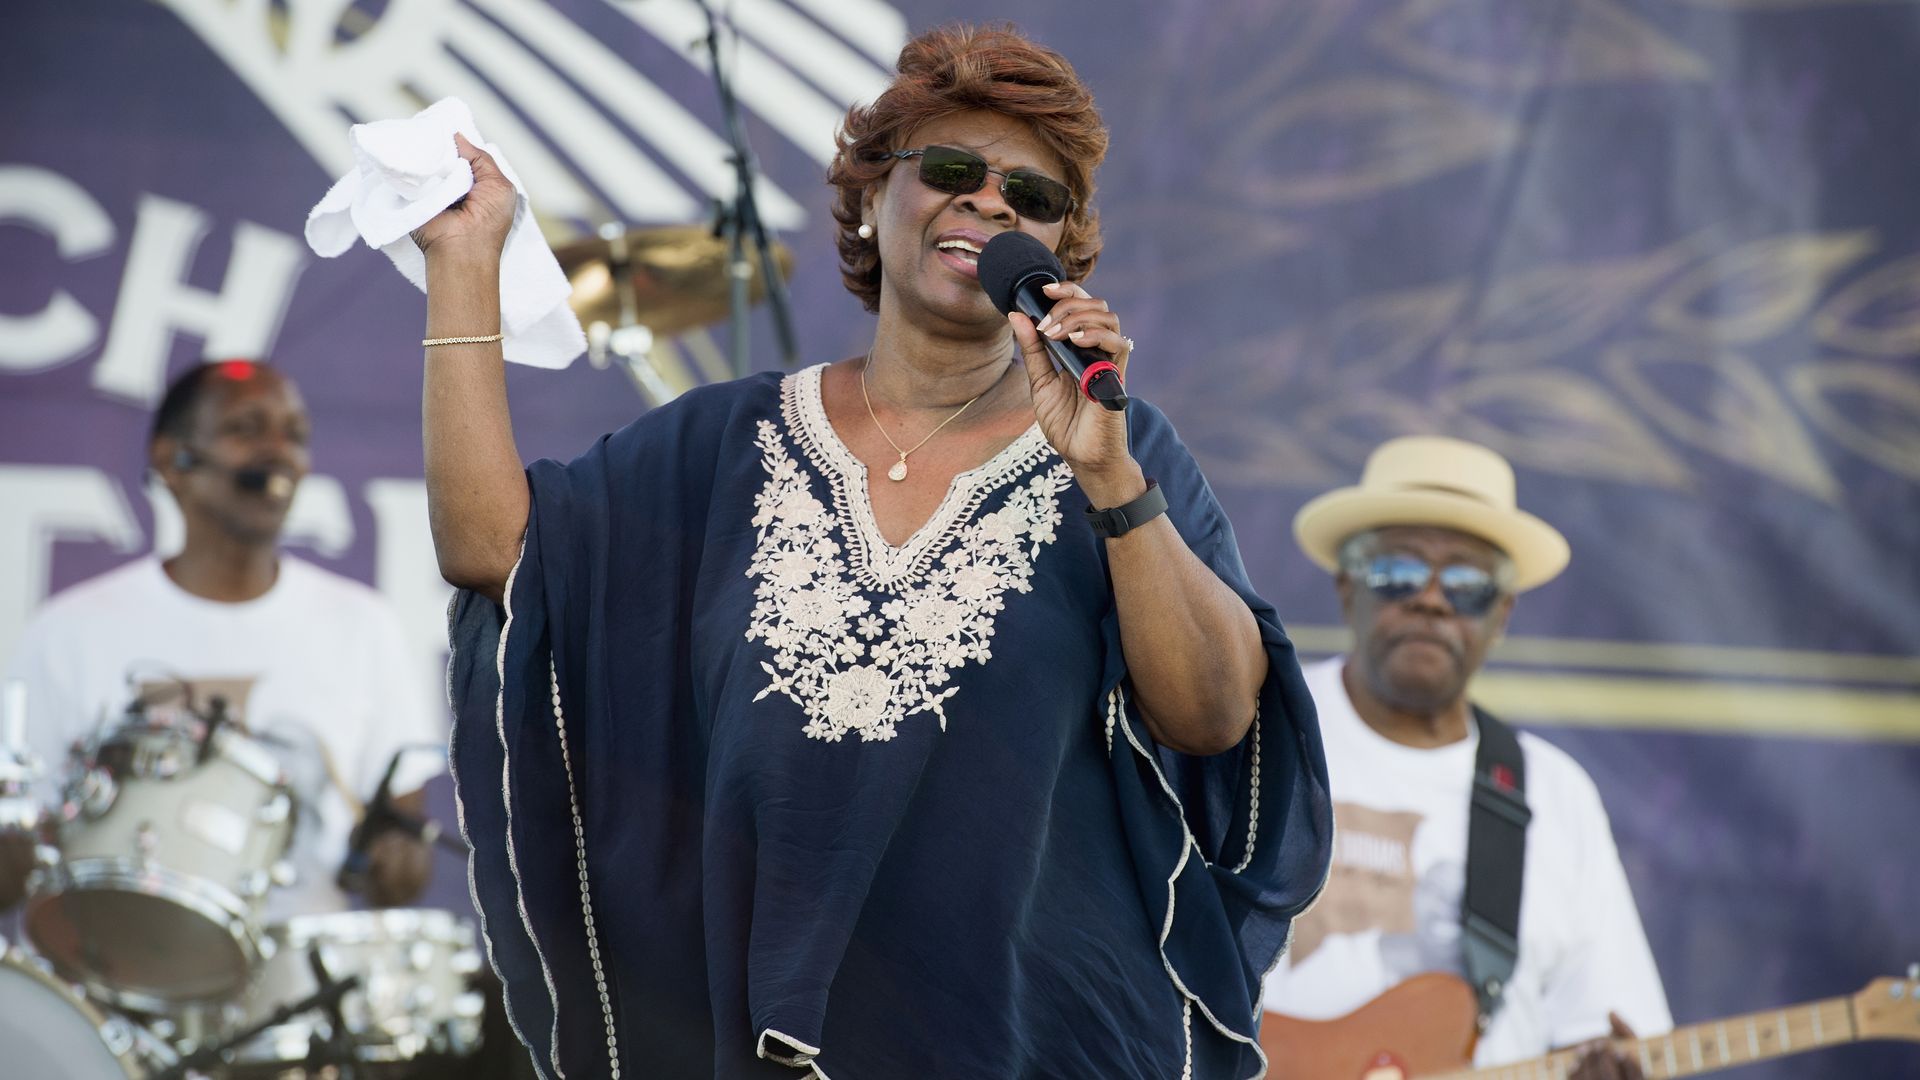 Irma Thomas performs at French Quarter Fest 2016, singing on stage with a white kerchief in one hand and wearing a dark blue caftan dress and sunglasses.